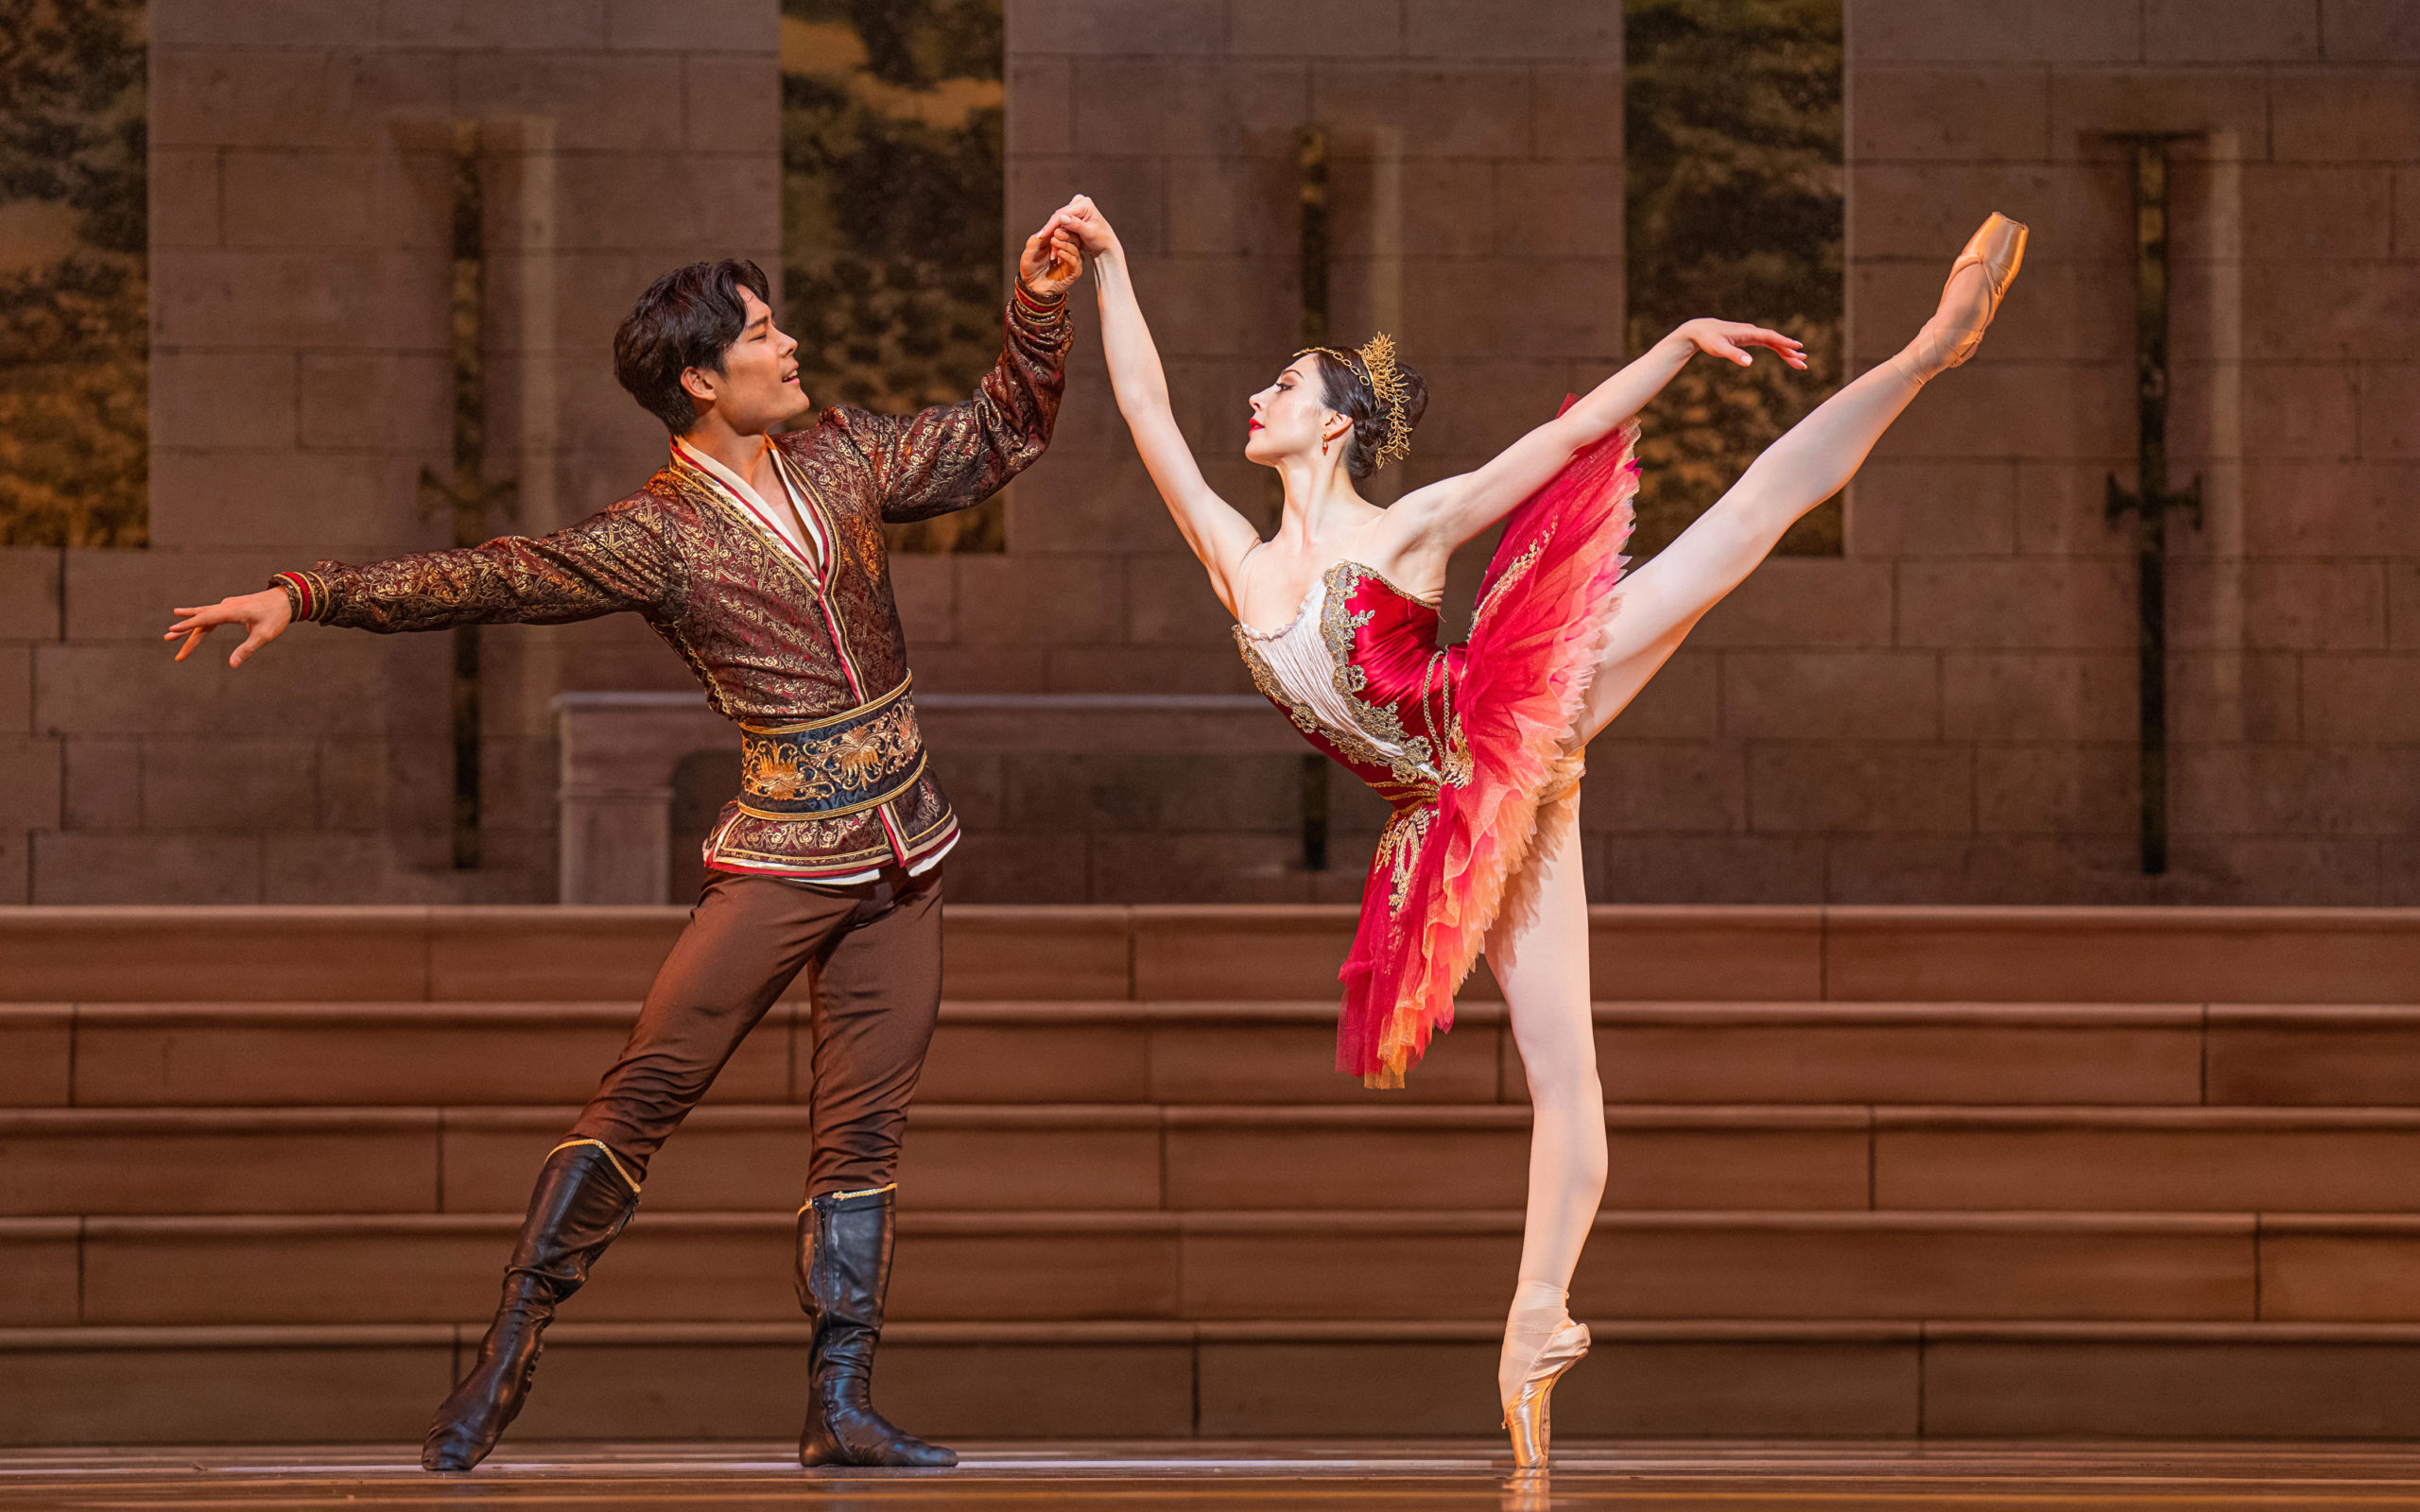 Young Gyu Choi, wearing a brown, gold and red tunic shirt, brown tights and black boots, stands on his left leg with his right extended to the side and holds Maia Makhateli's right hand as she balances in a high first arabesque on pointe. Makhateli wears a rich red tutu, gold crown and pink tights and pointe shoes. They perform onstage in front of a shallow stone staircase.